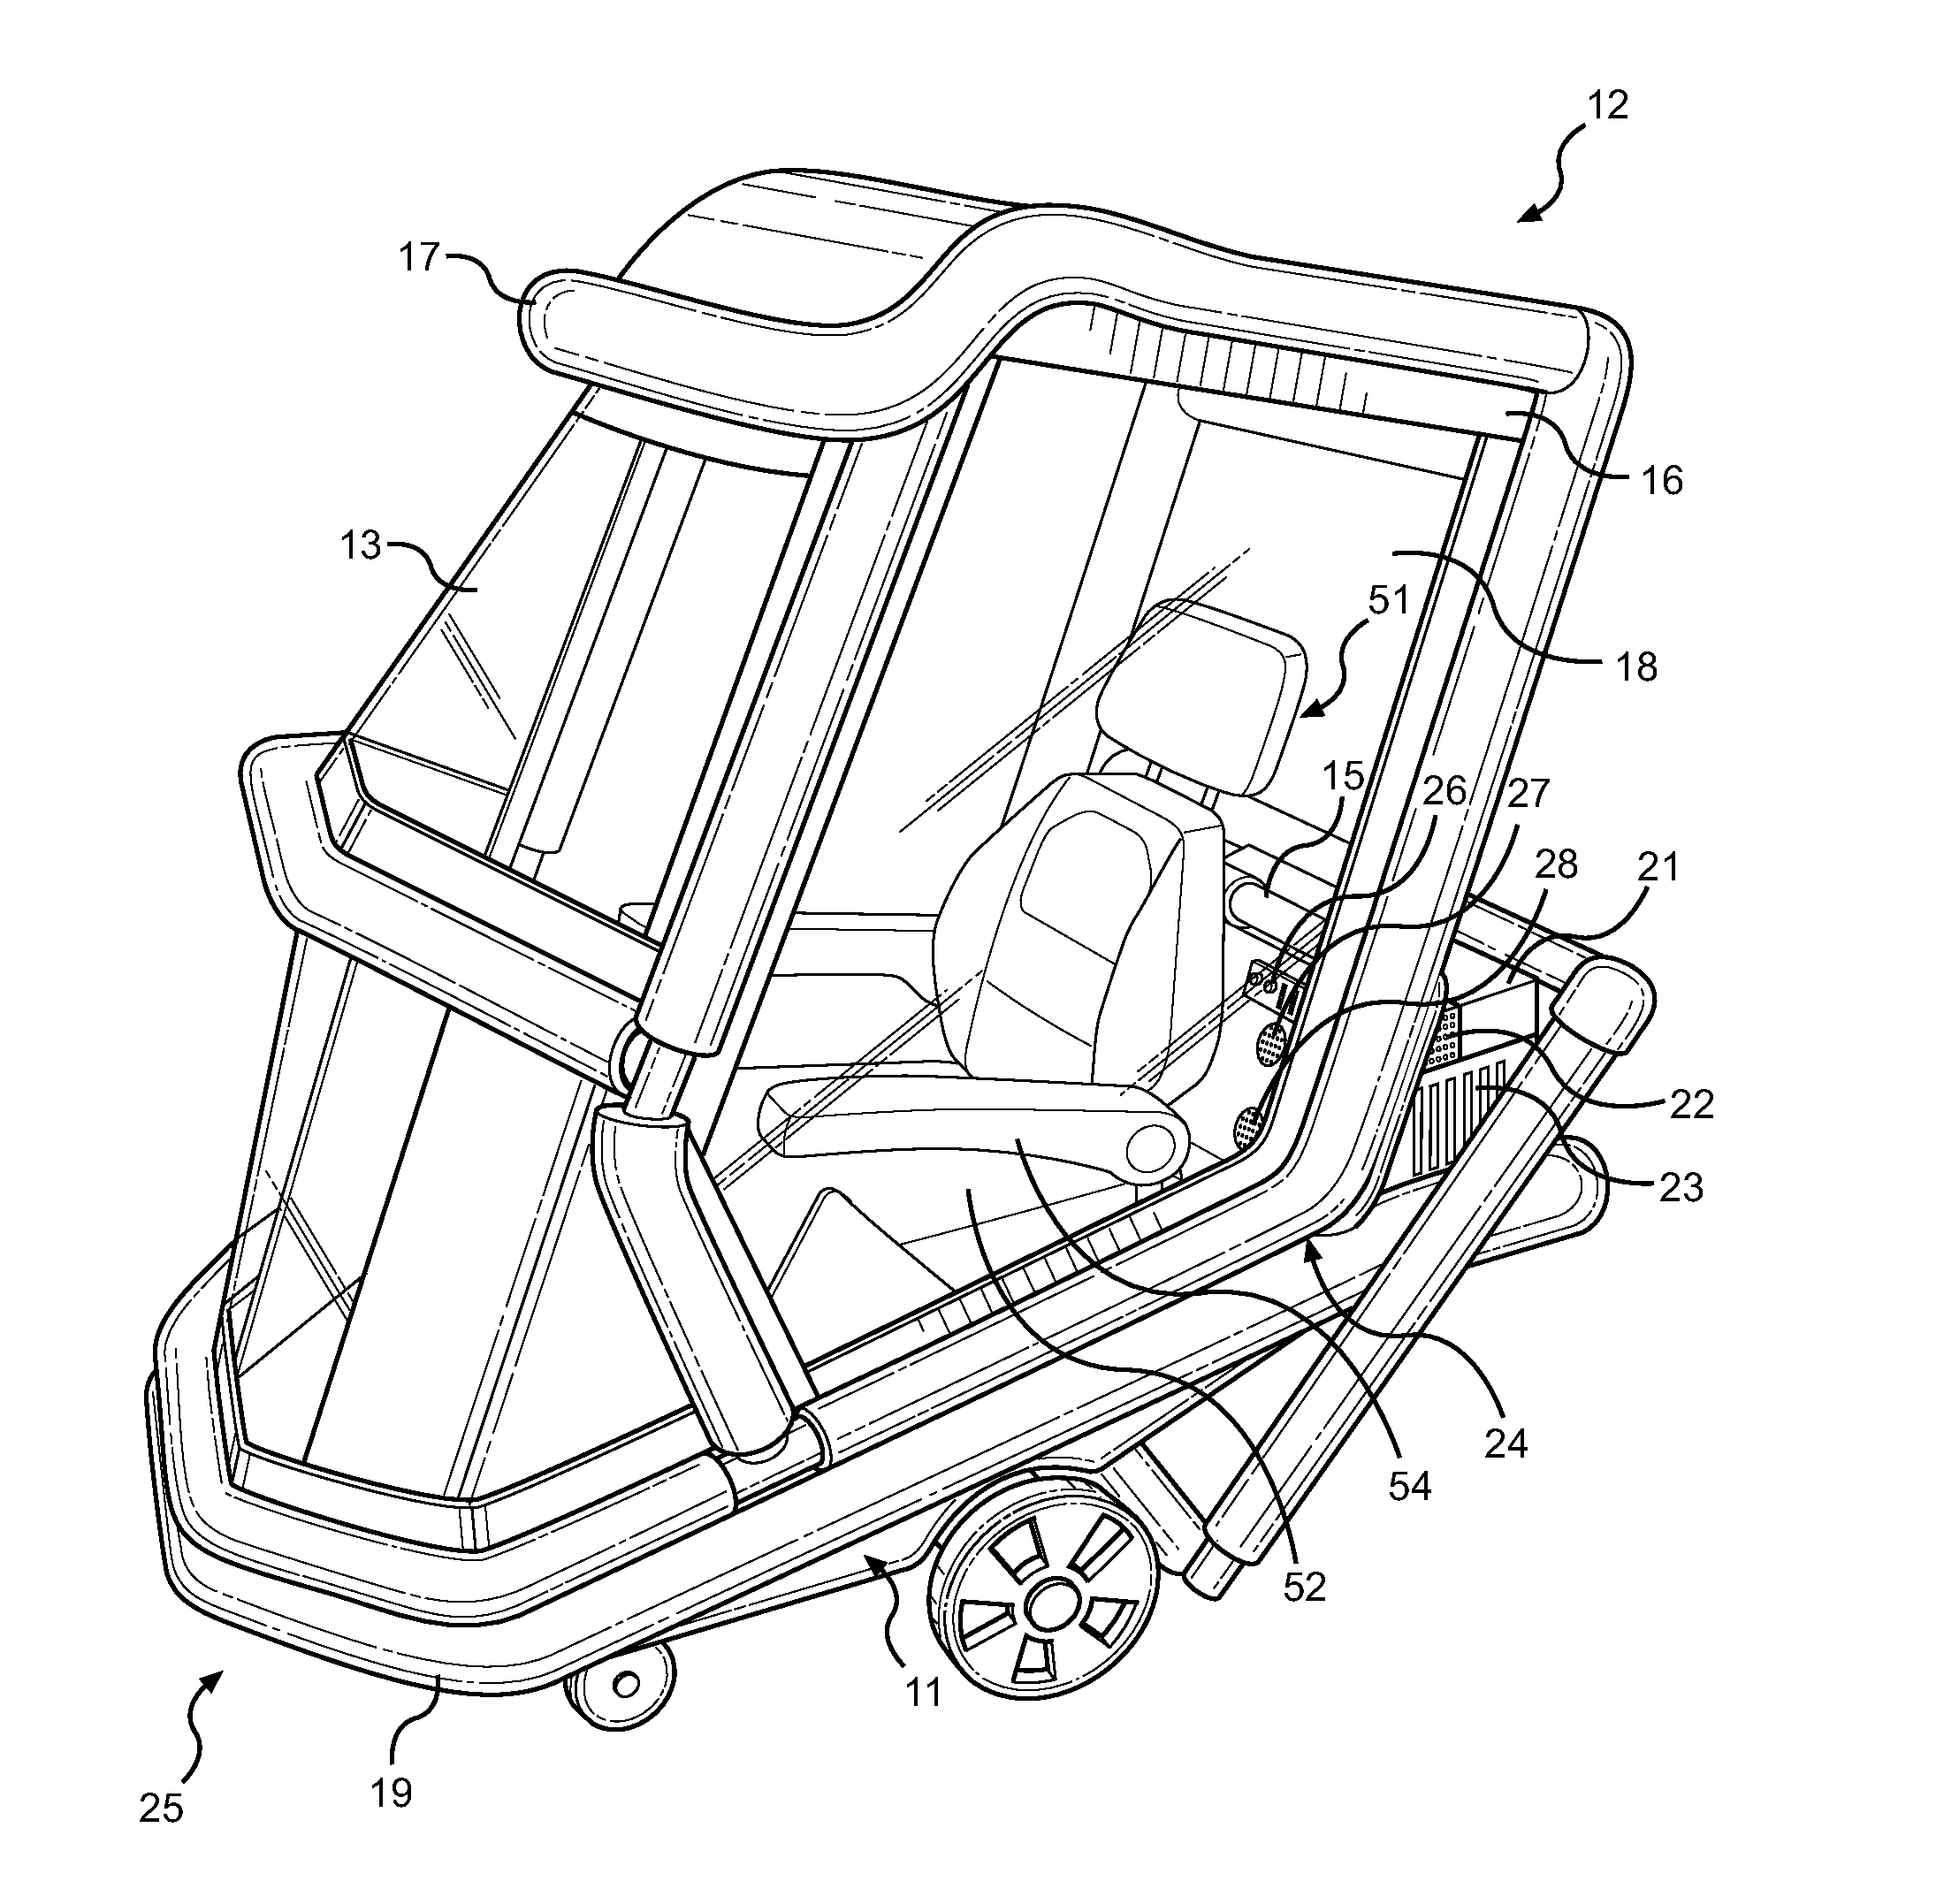 Temperature-Controlled Personal Mobility Device Enclosure